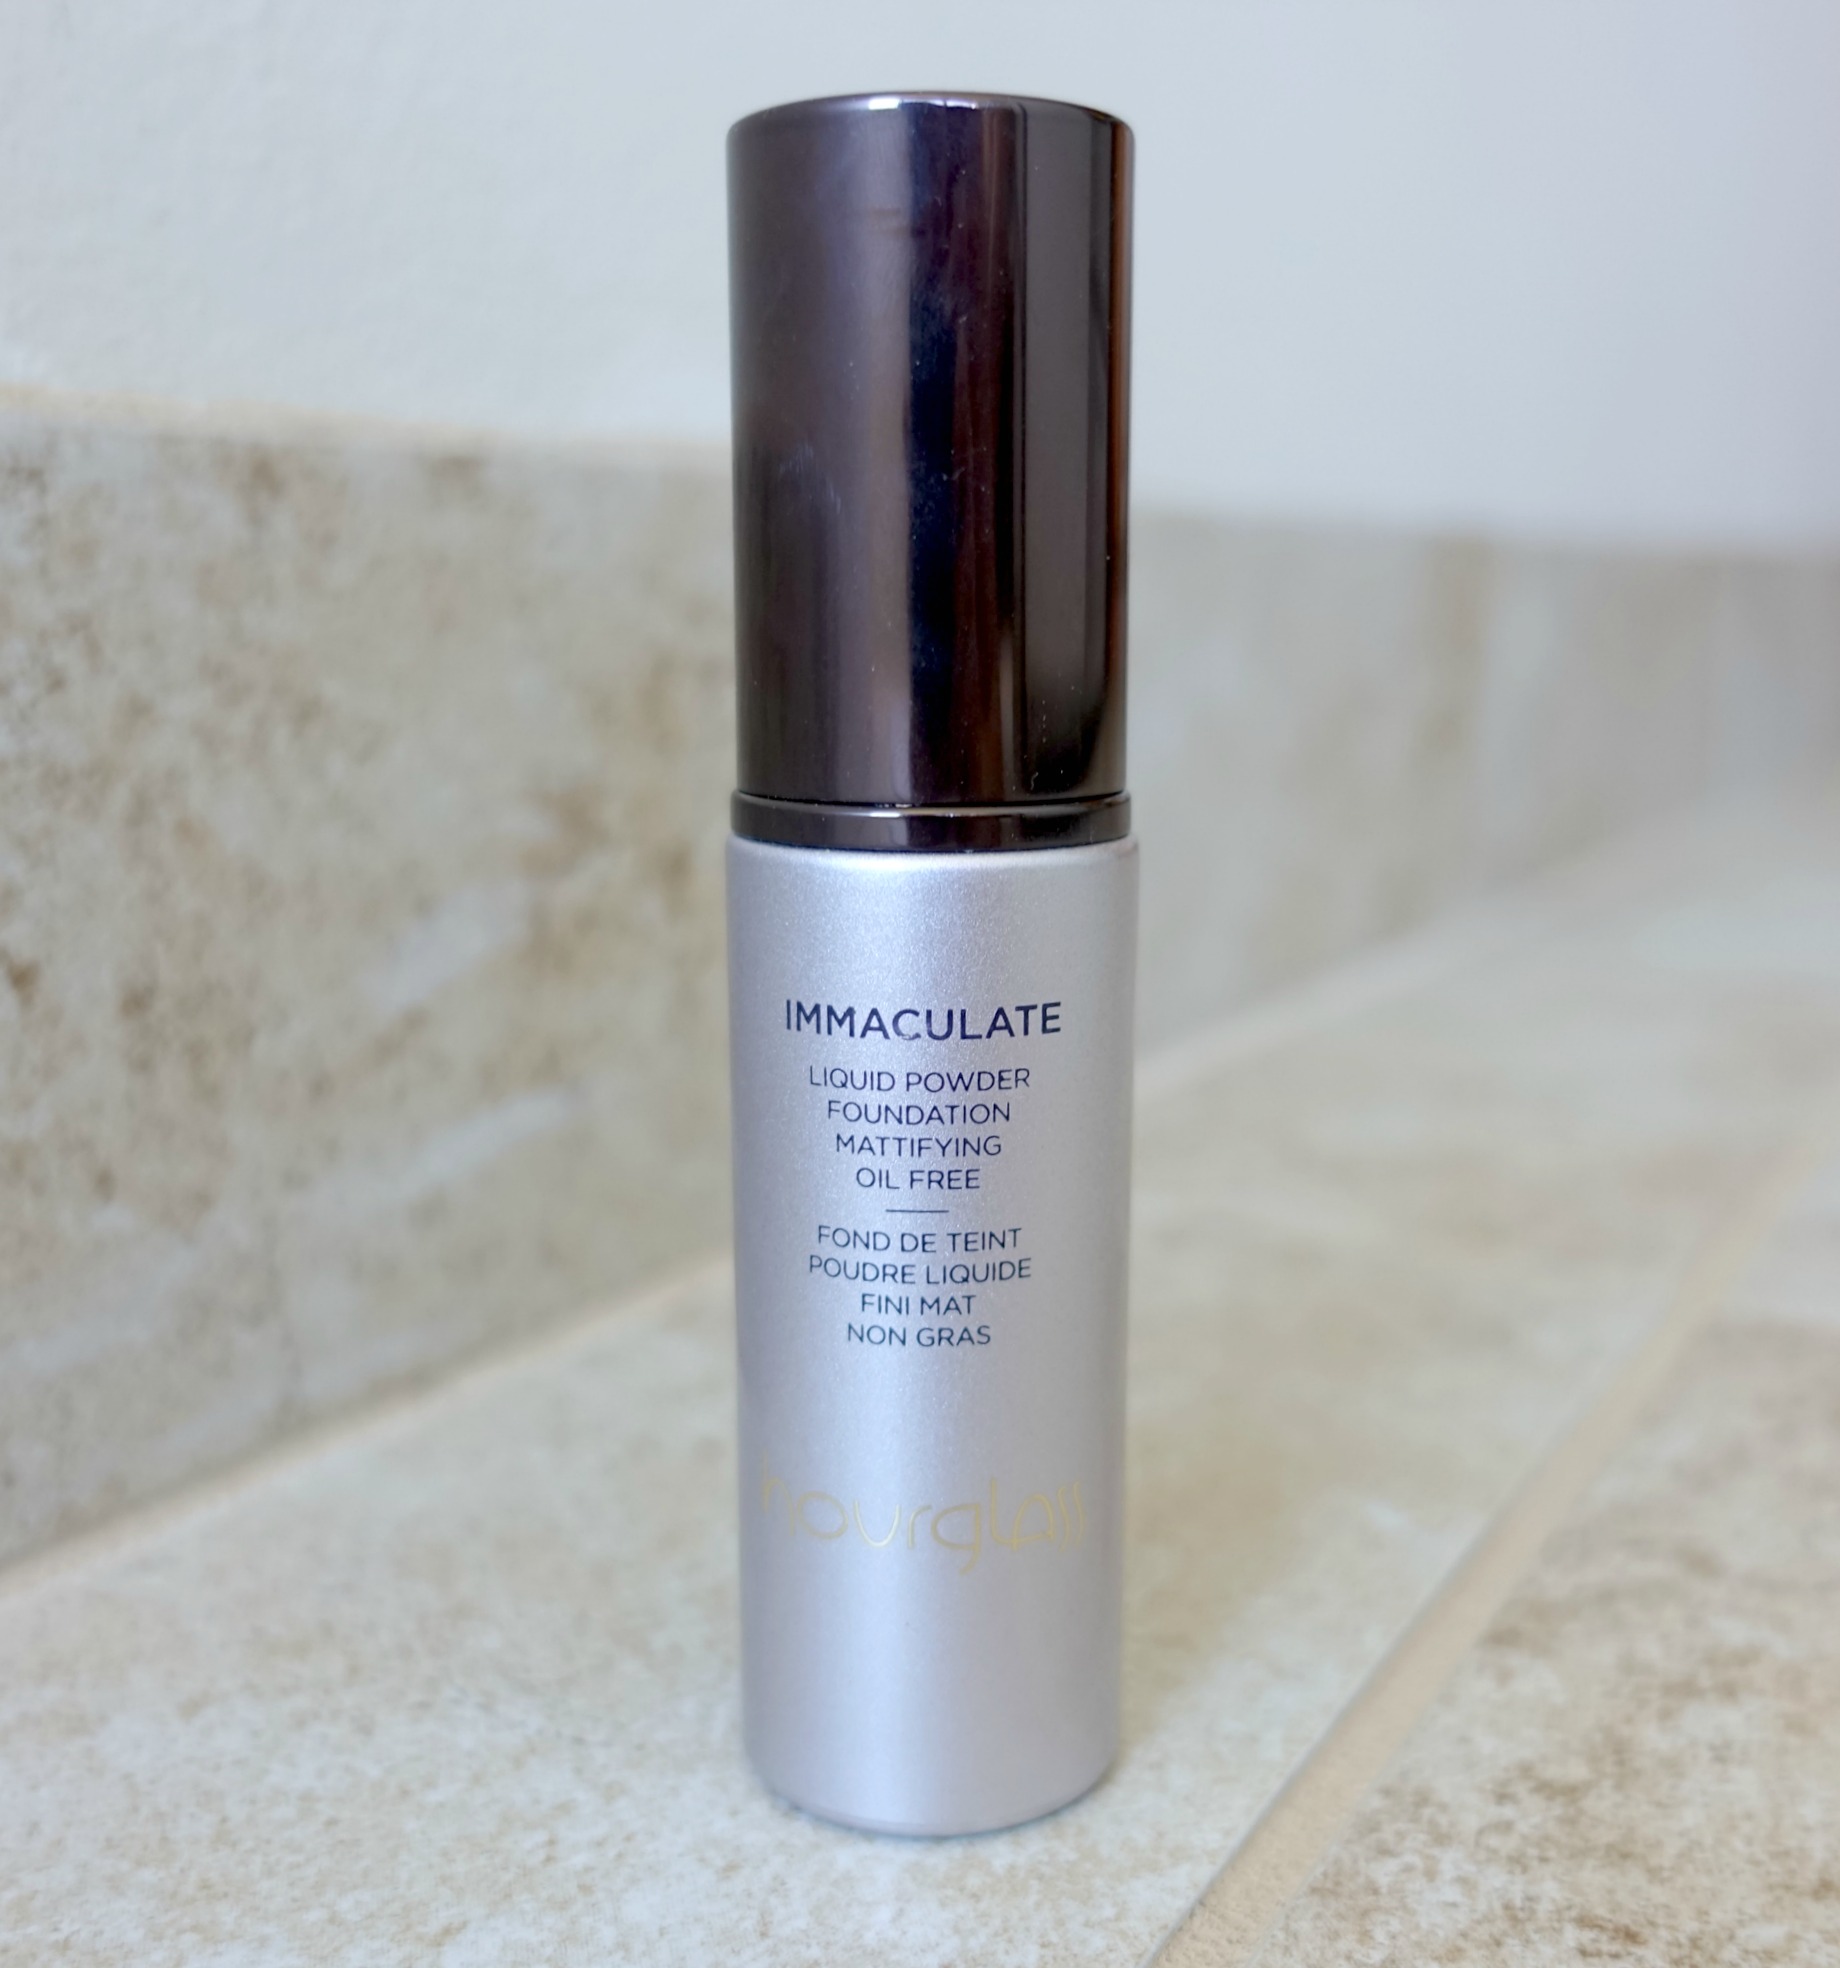 Hourglass Foundation Immaculate Liquid Powder in Shell Review